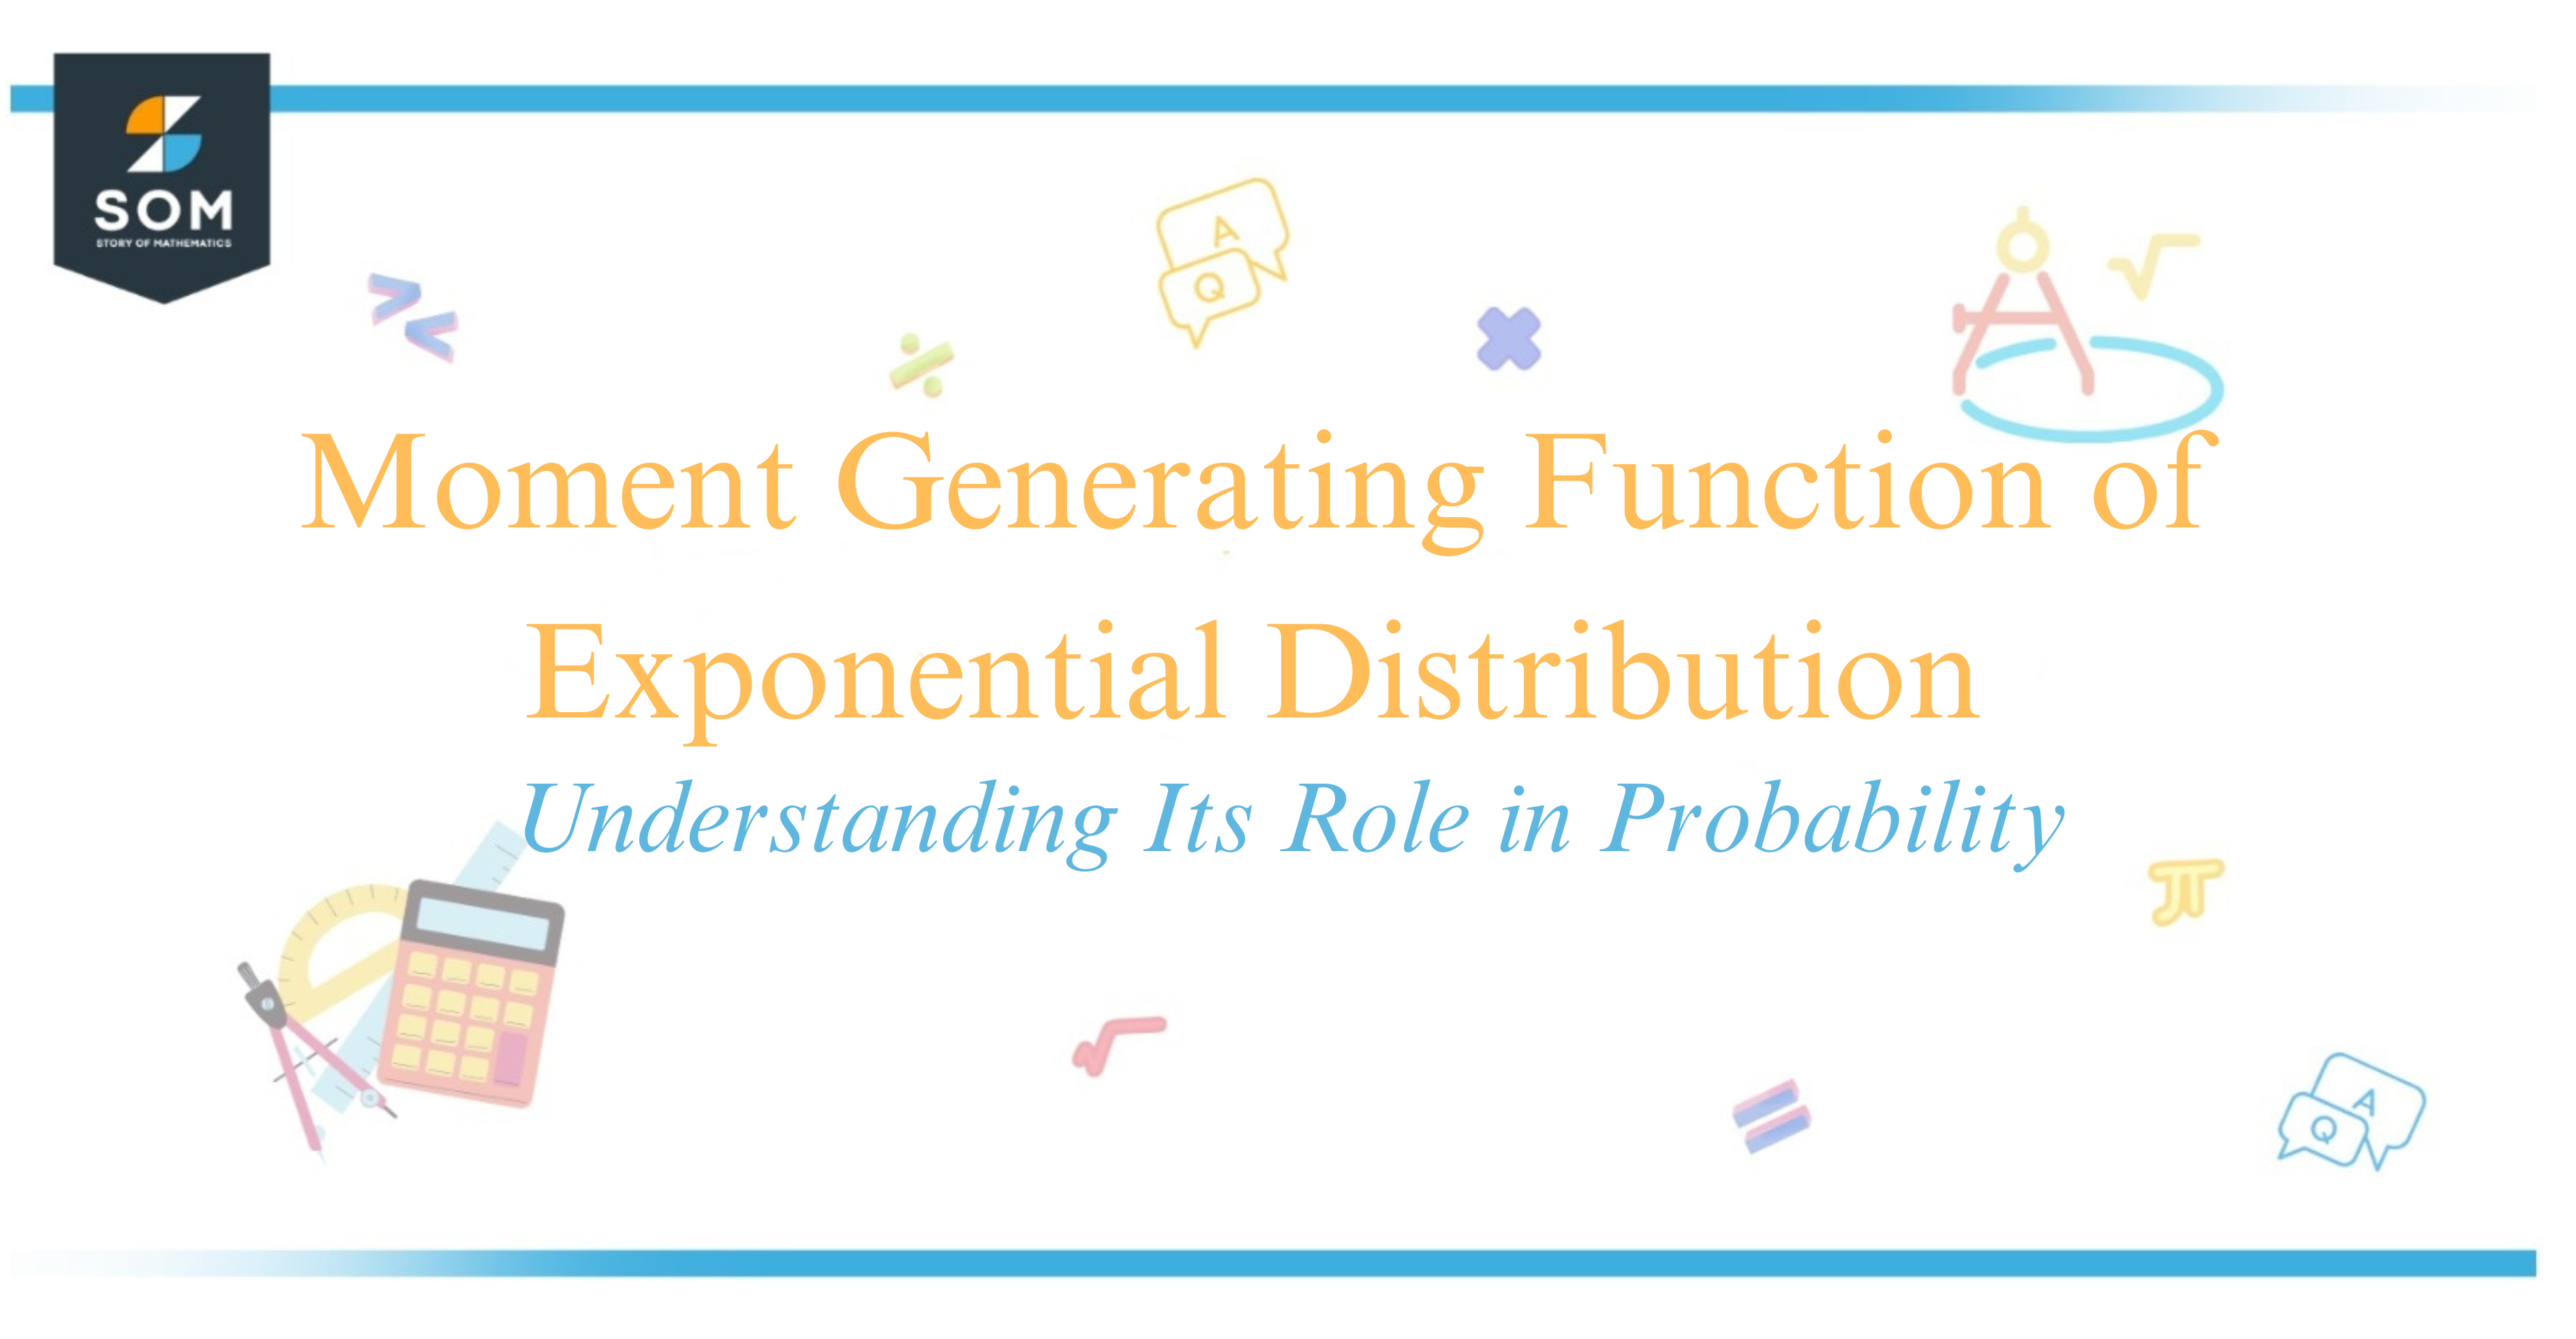 Moment Generating Function of Exponential Distribution Understanding Its Role in Probability